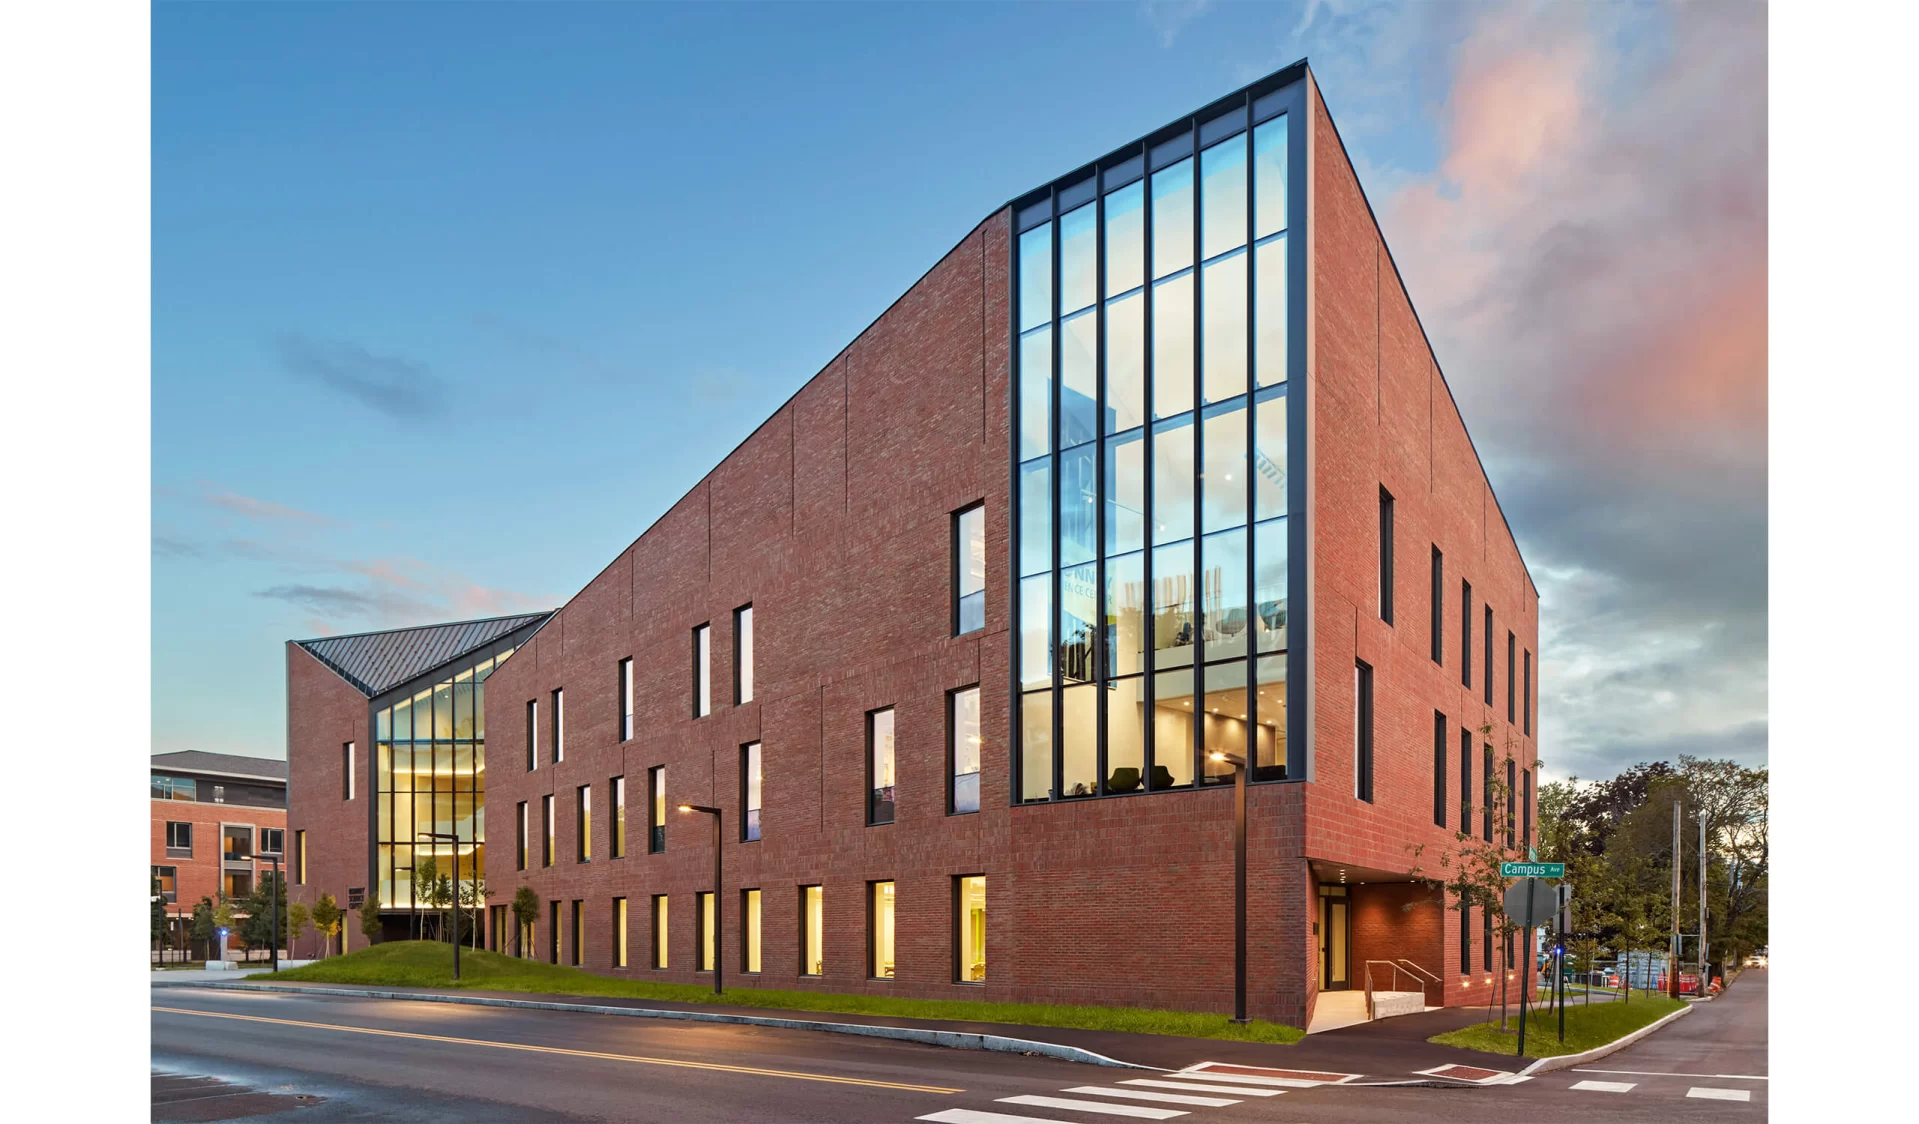 The funding and opening of the new Bonney Science Center in fall 2021 is part of a $75 million investment to drive the evolution of science education at Bates. (Photography courtesy of Payette)